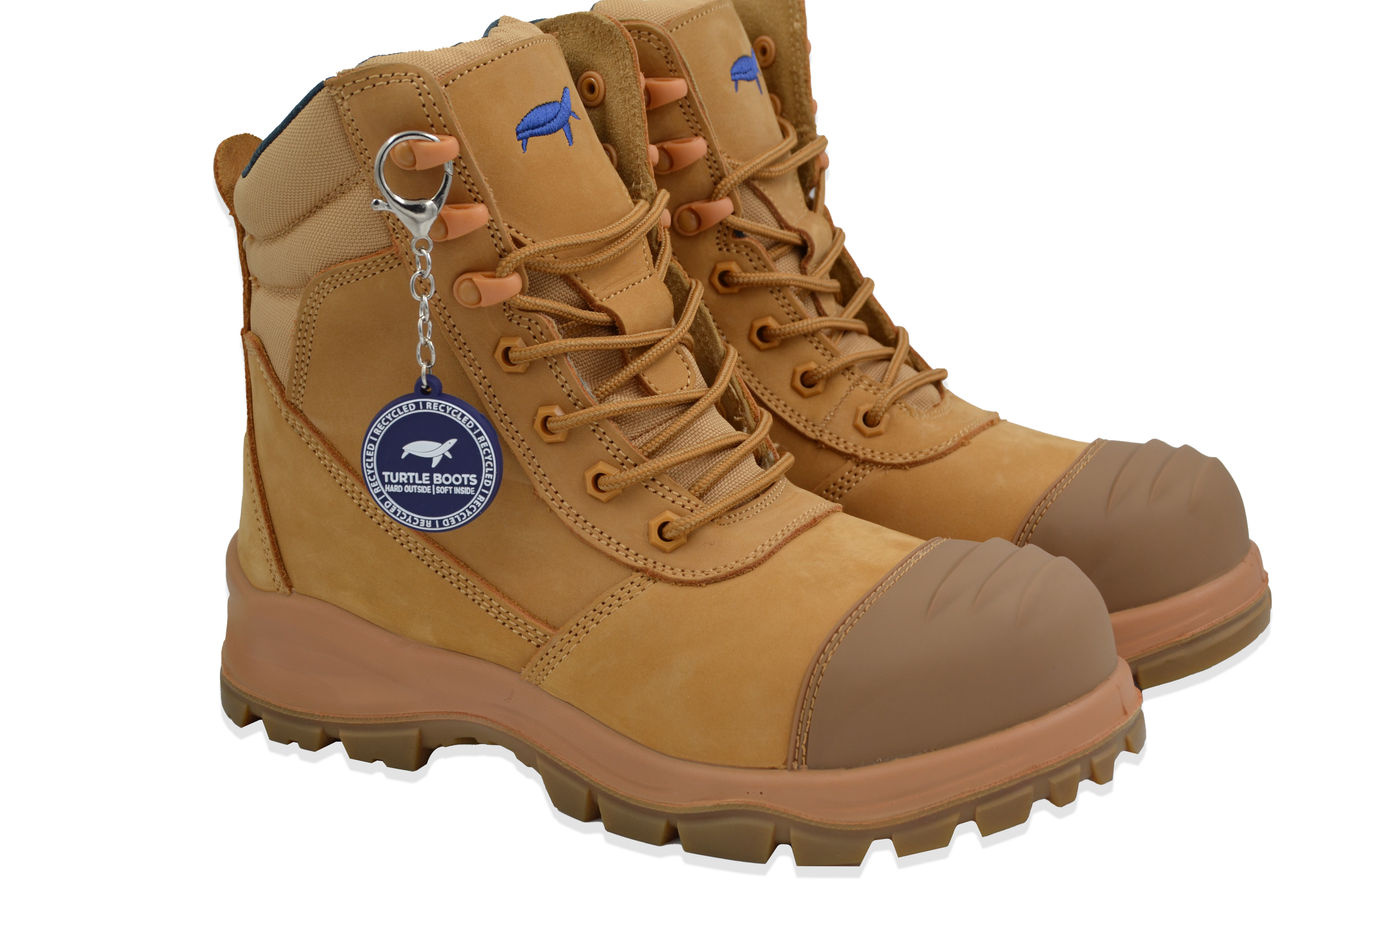 Materials of Safety Boots